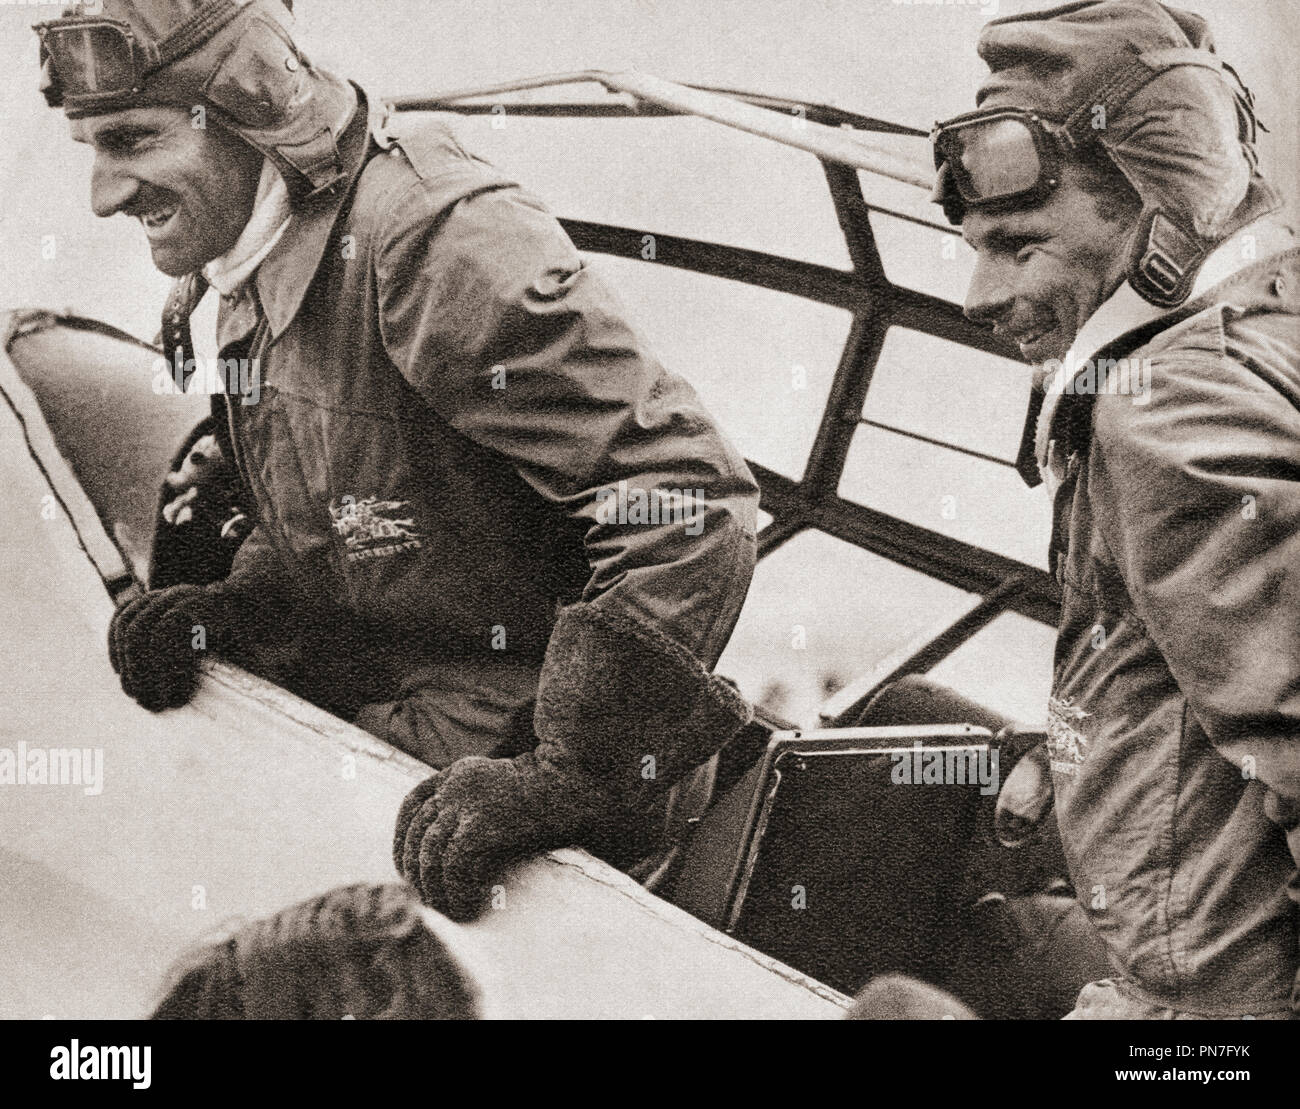 A. E. Clouston, right, and Victor Ricketts arriving in Croydon Airdrome, March 26, 1938 after flying from England to New Zealand and back in just under eleven days. Air Commodore Arthur Edmond Clouston, 1908 – 1984.  British test pilot and senior Royal Air Force officer.  From These Tremendous Years, published 1938. Stock Photo